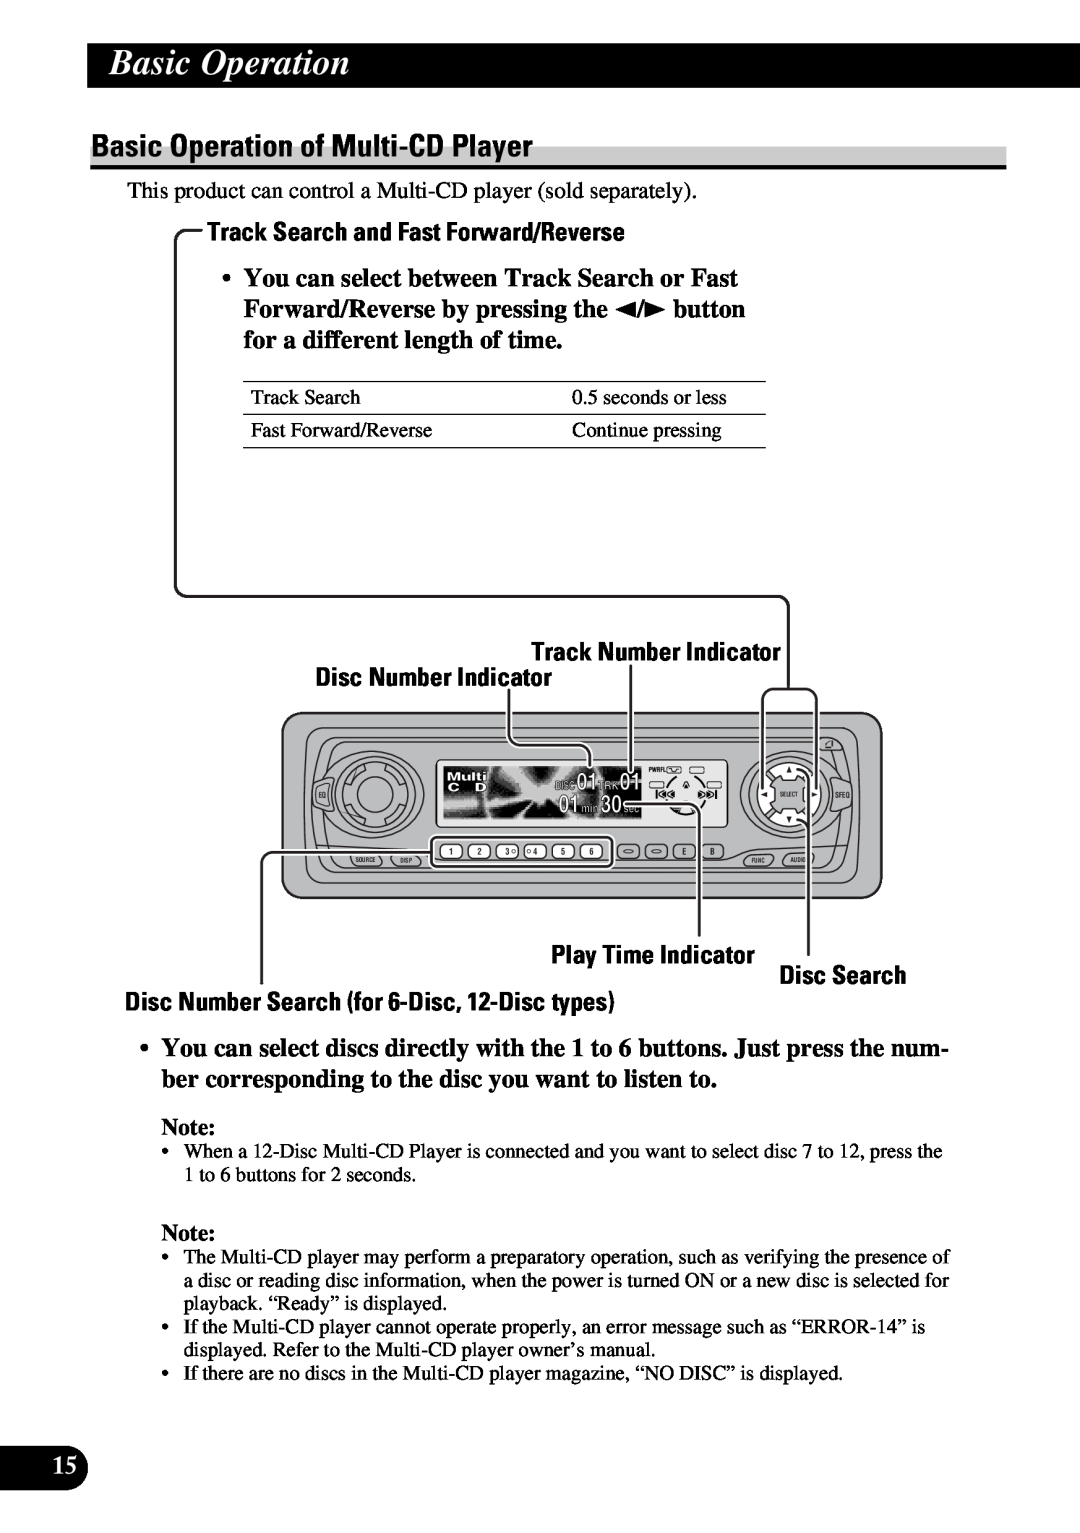 Pioneer DEH-P6300, DEH-P7300 operation manual Basic Operation of Multi-CD Player, Track Search and Fast Forward/Reverse 